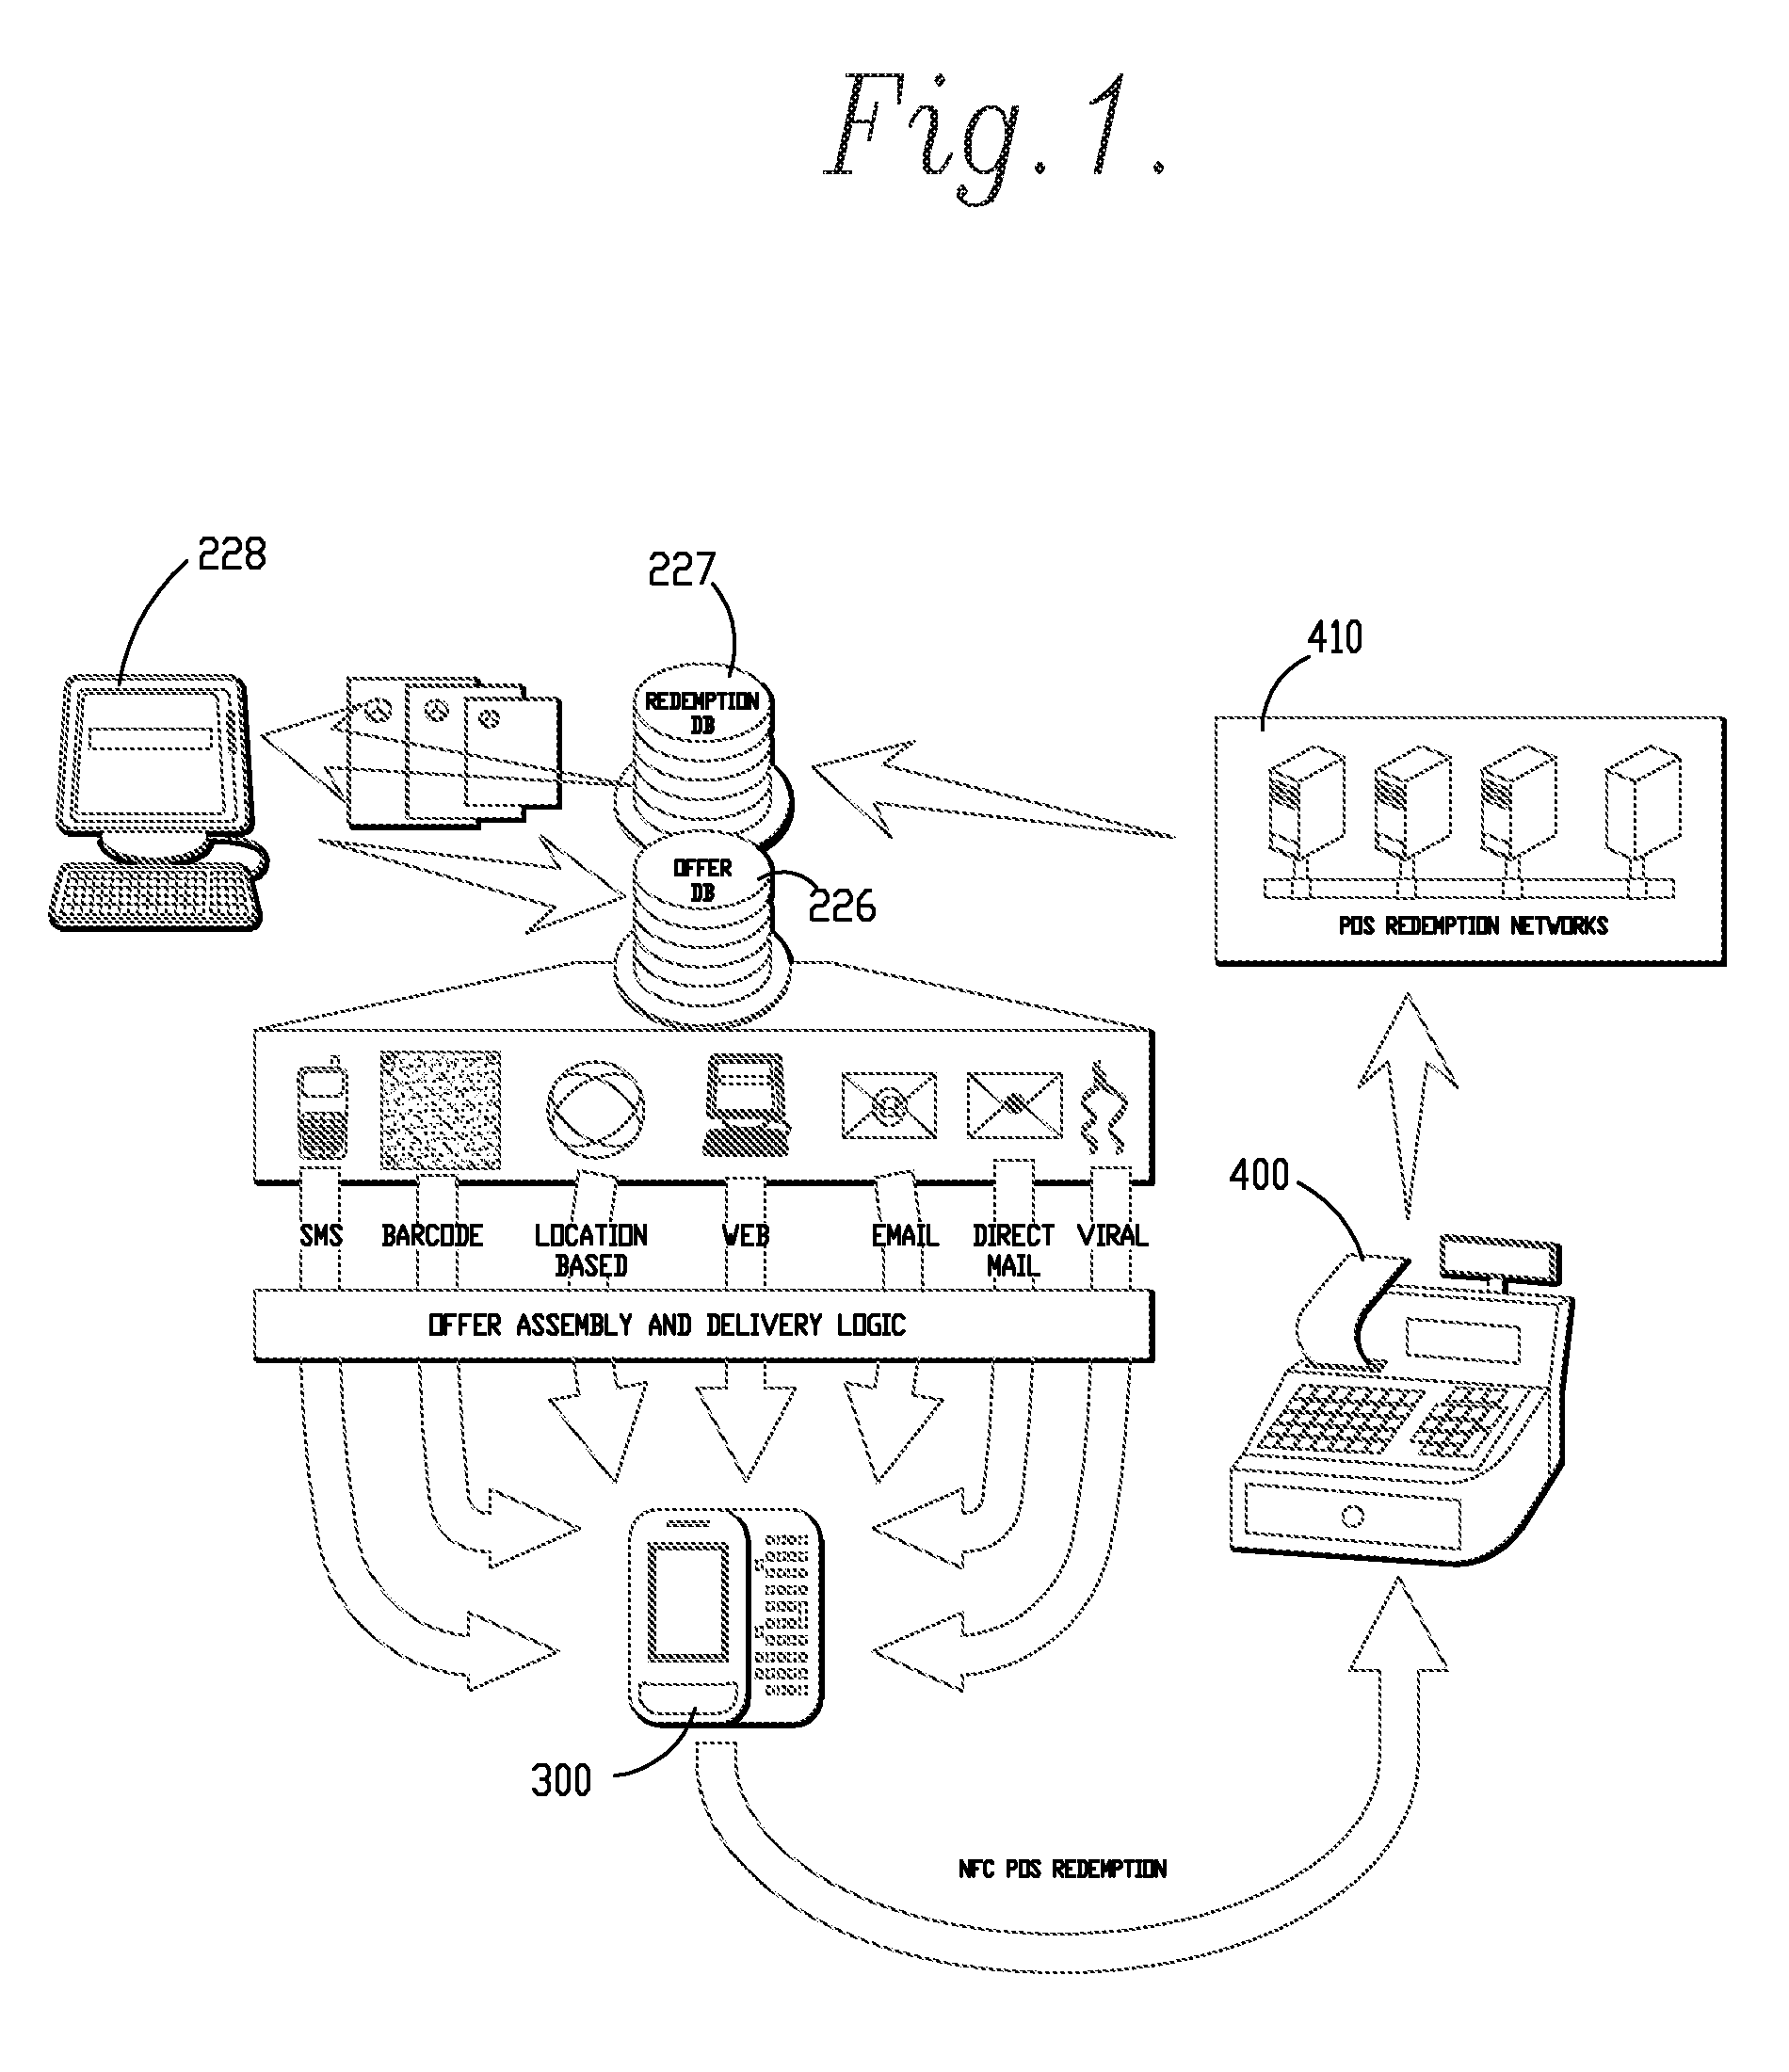 Methods and systems for creation and distribution of promotional materials and gathering of consumer data